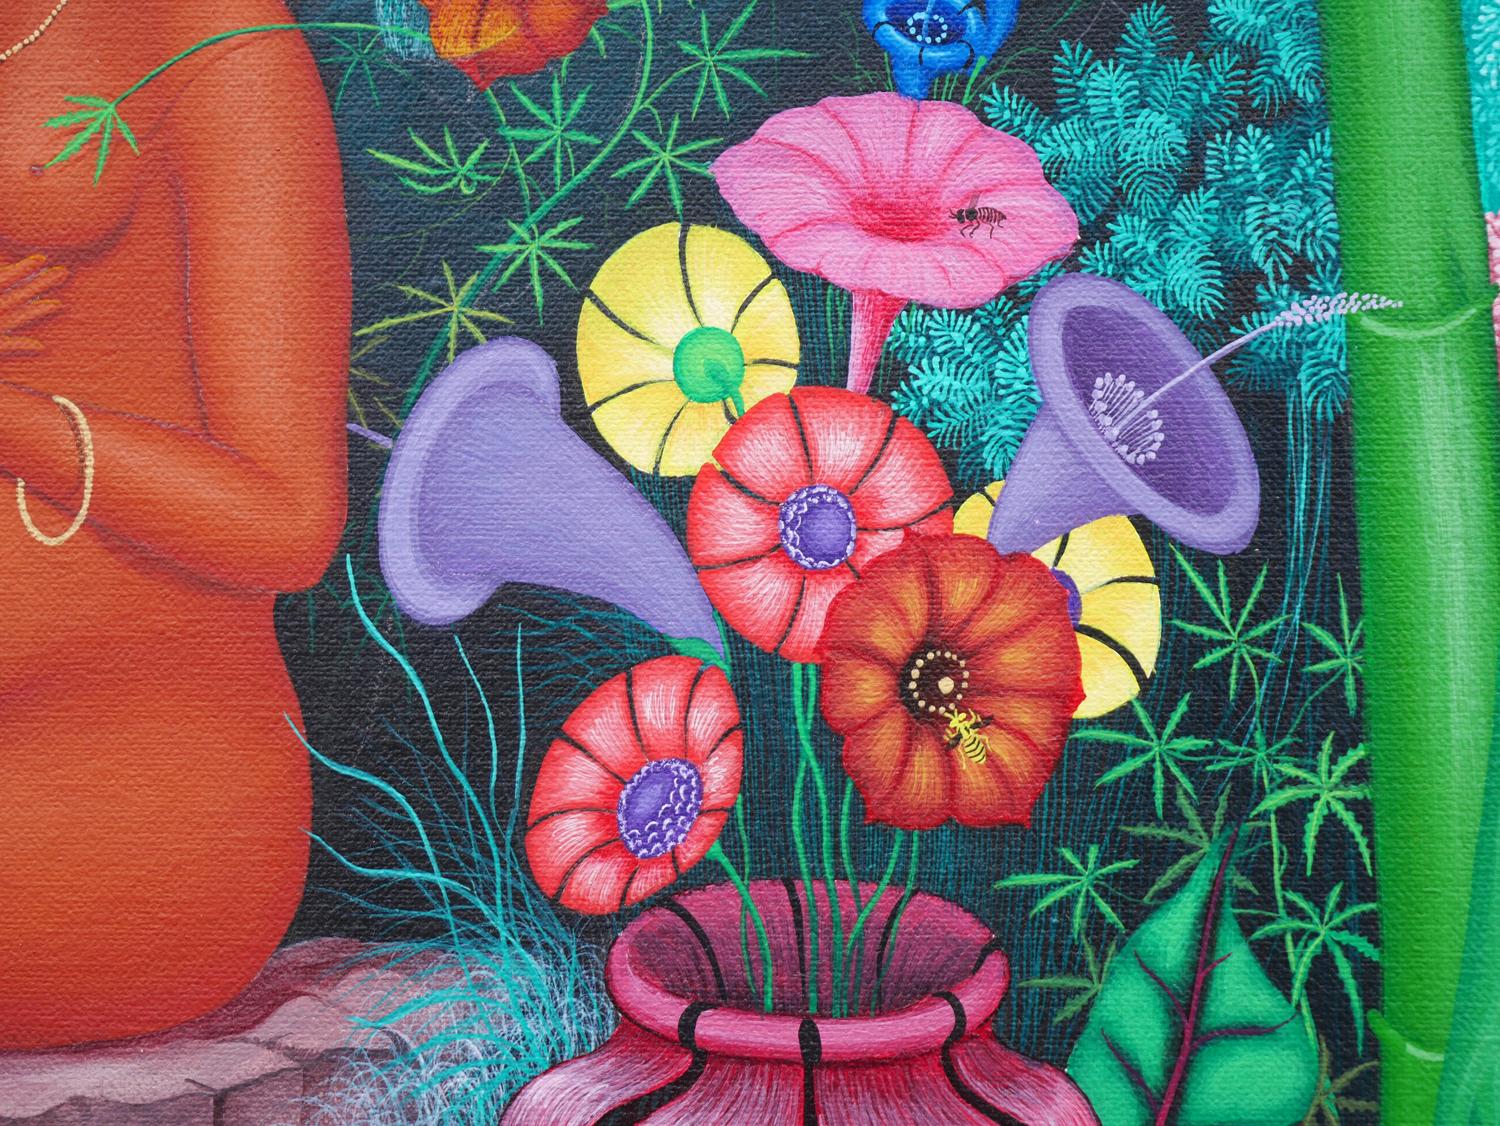 Colorful Tropical Jungle Landscape with Central Nude Female Figure 2